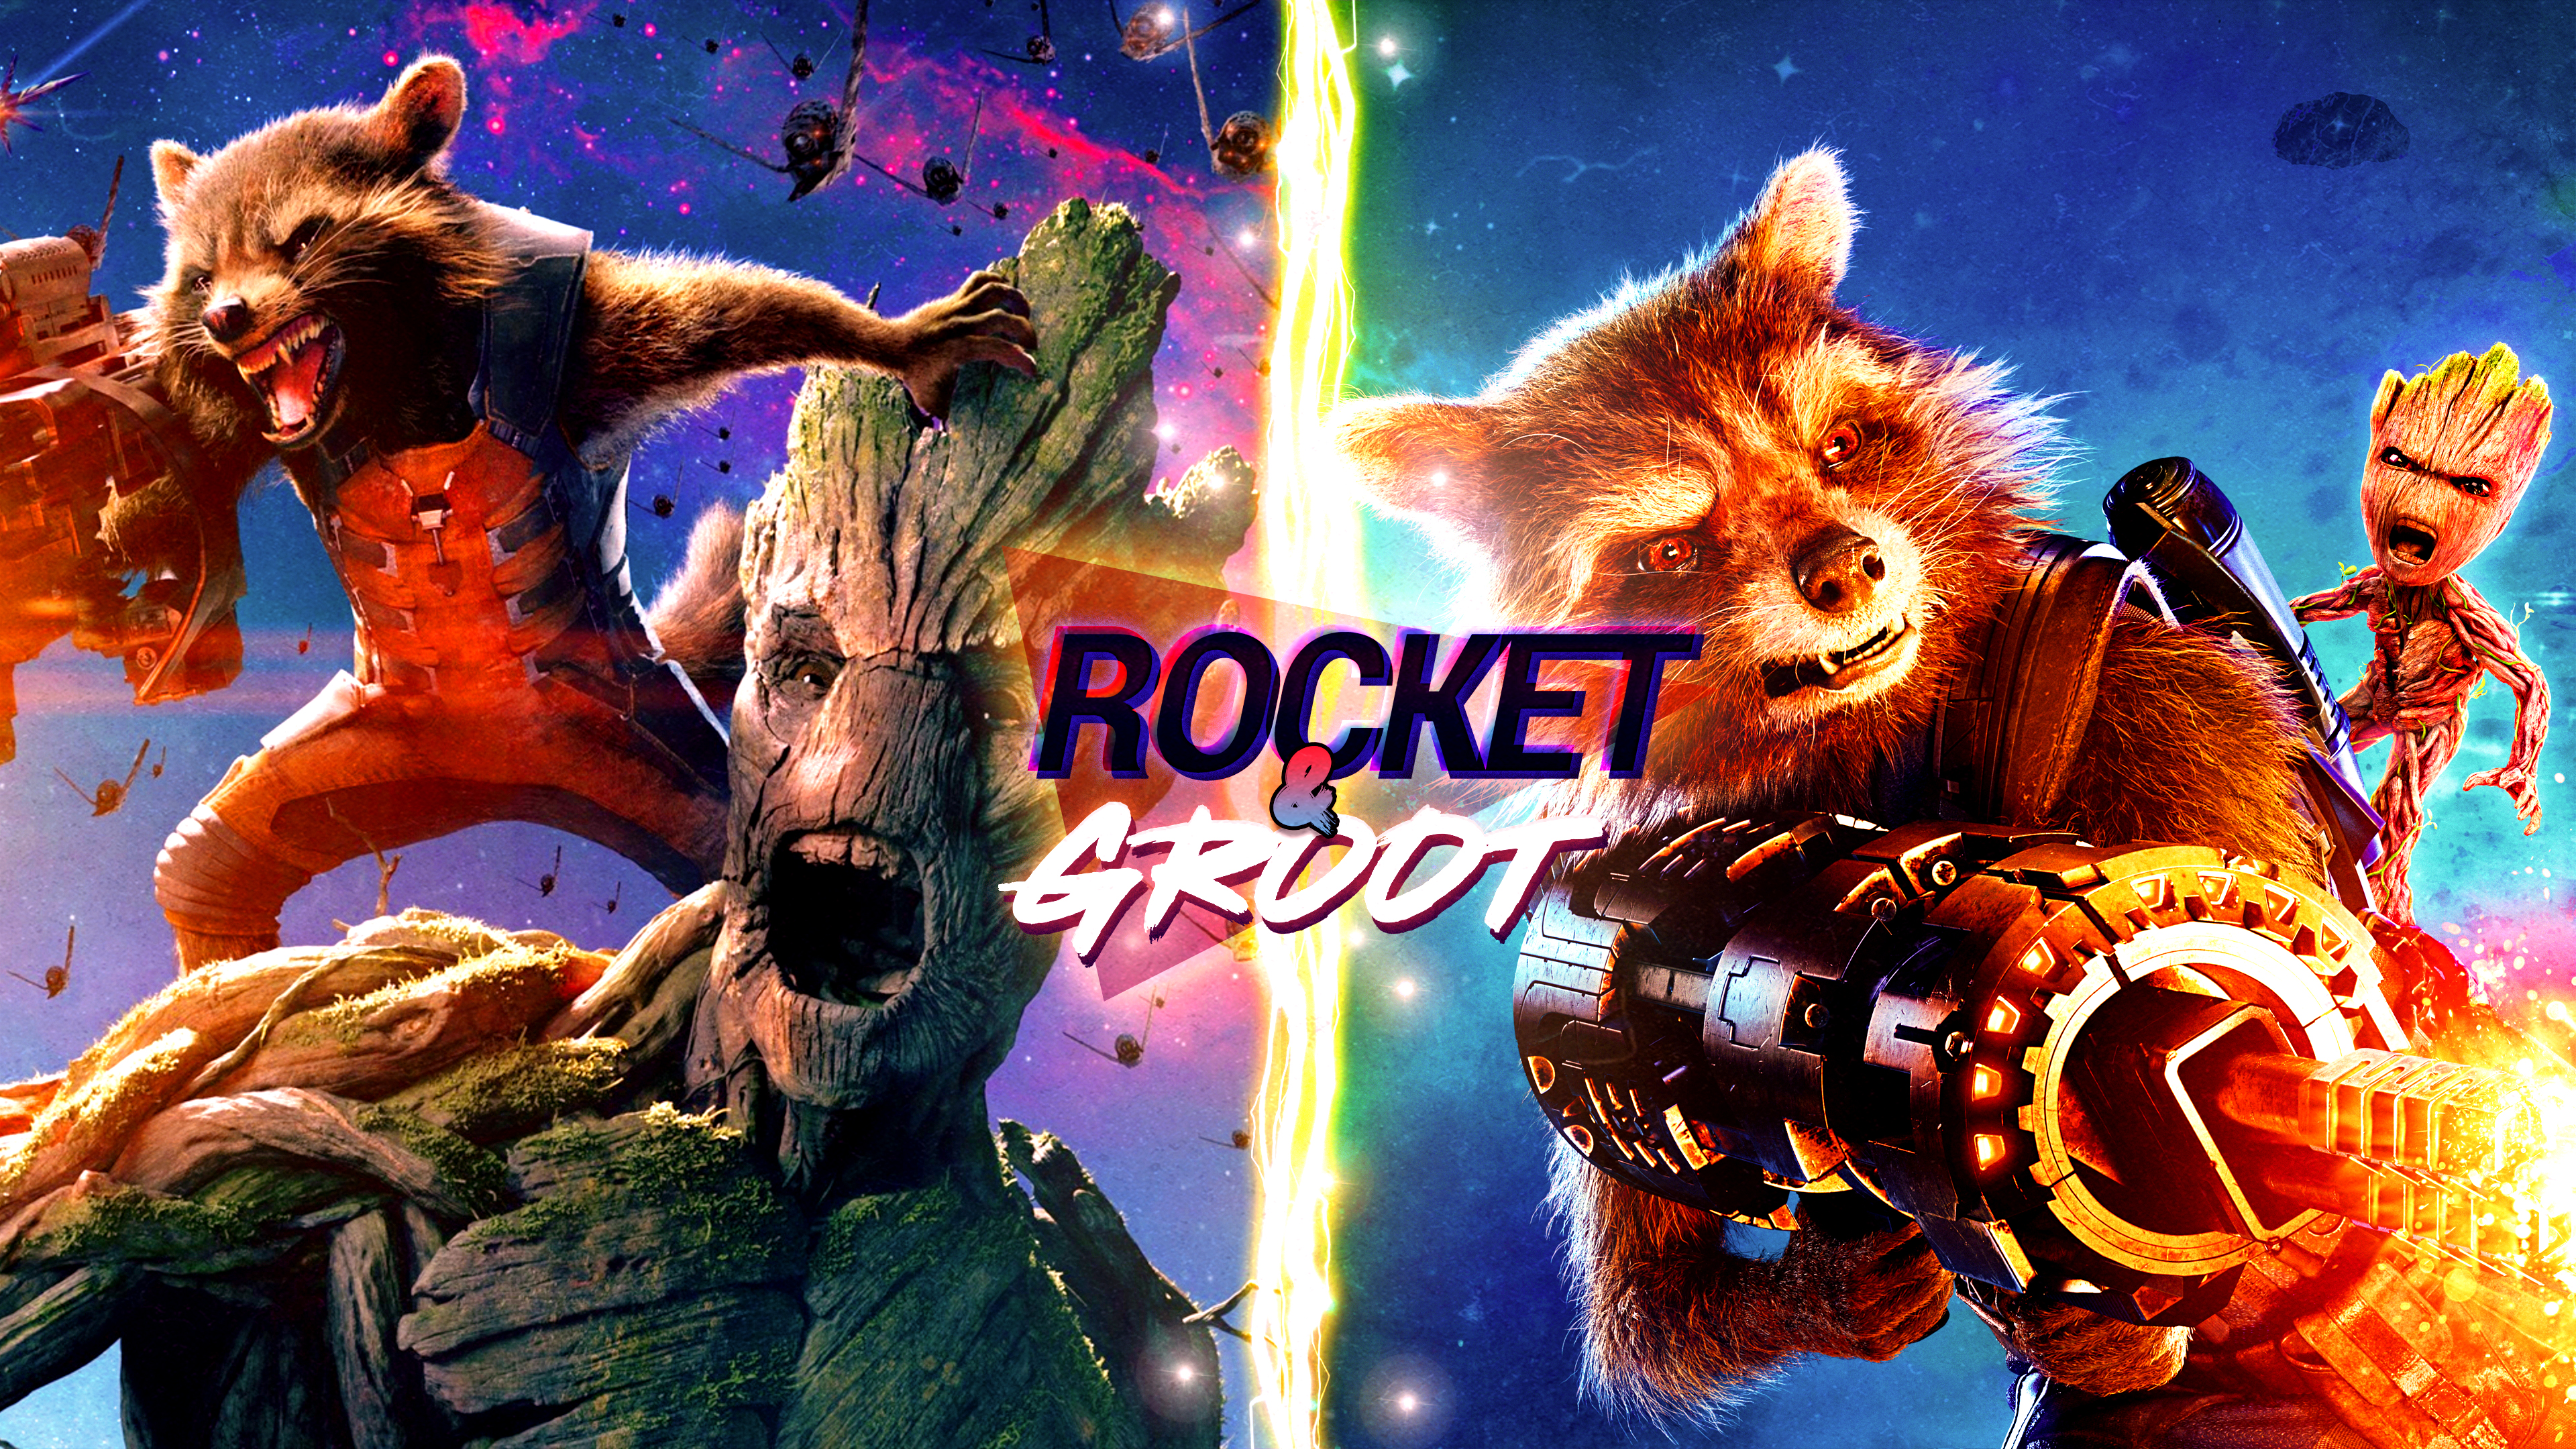 Rocket and groot wallpaper k by leafpenguins on